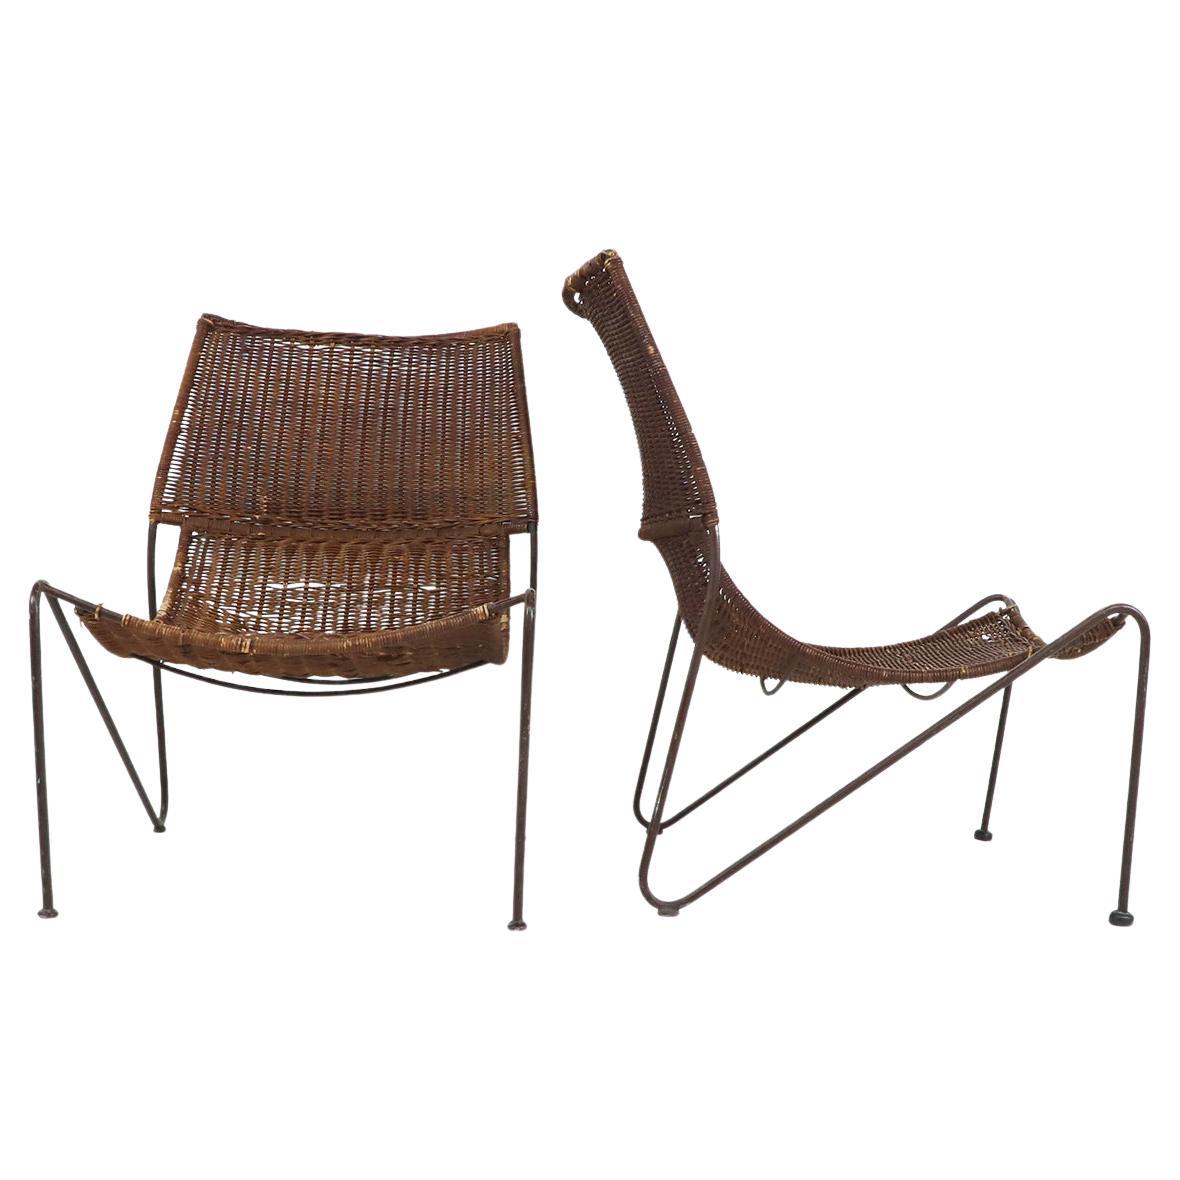 Wicker & Wrought Pair of Iron Lounge Chairs in the Manner of Frederick Weinberg